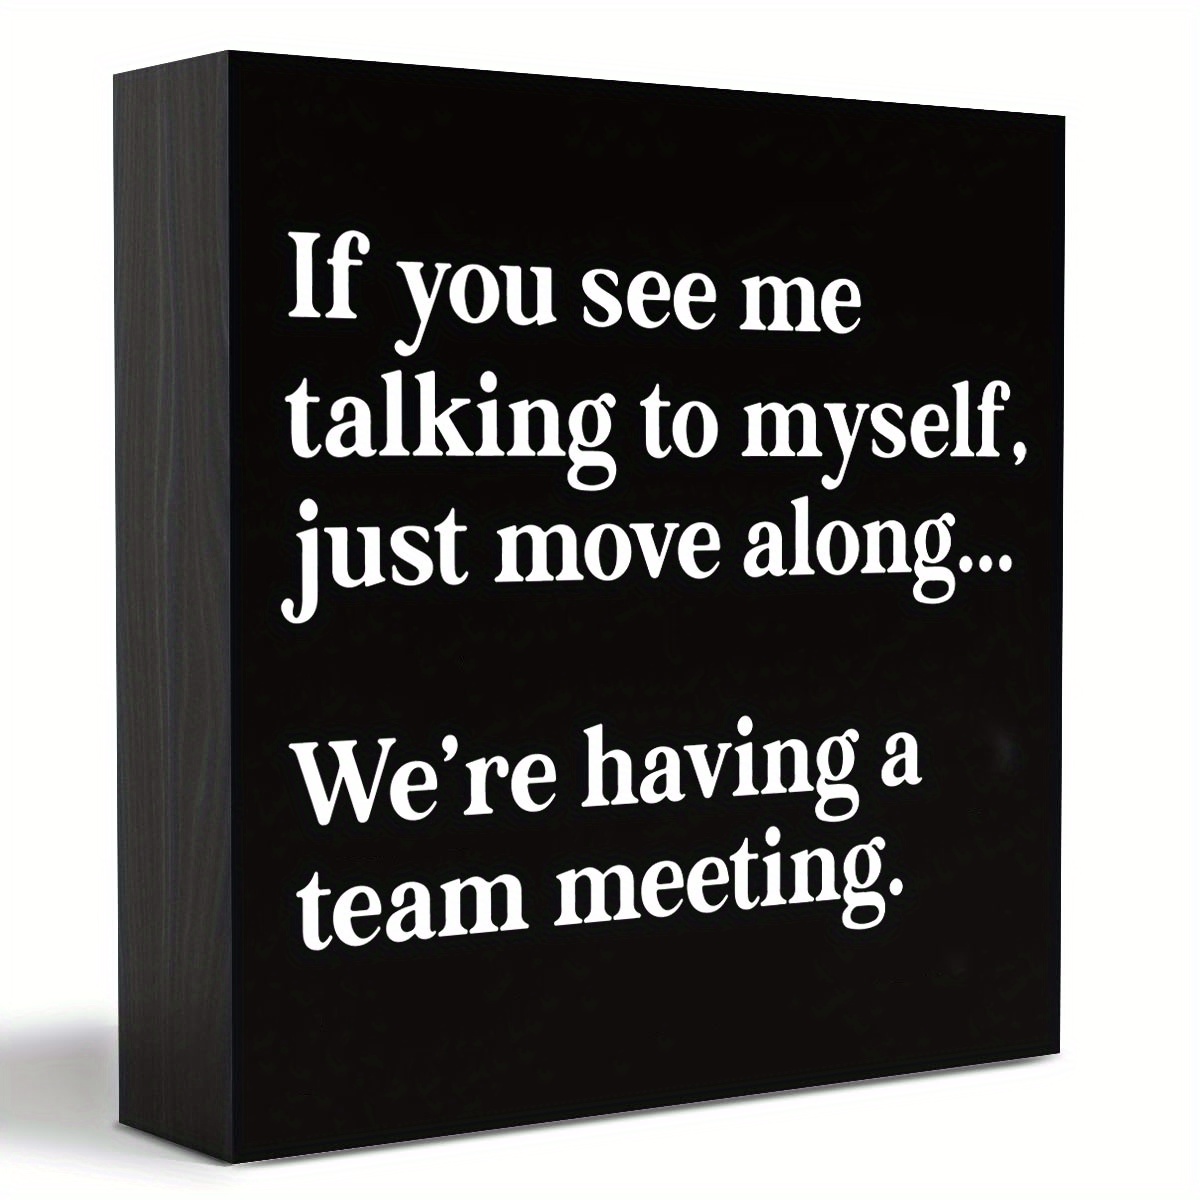 

1pc, If You See Me Talking To Myself Team Meeting Wood Box Sign Decor, Desk Sign, Funny Office Wooden Box Block Sign For Home Office Shelf Table Decor Decorations